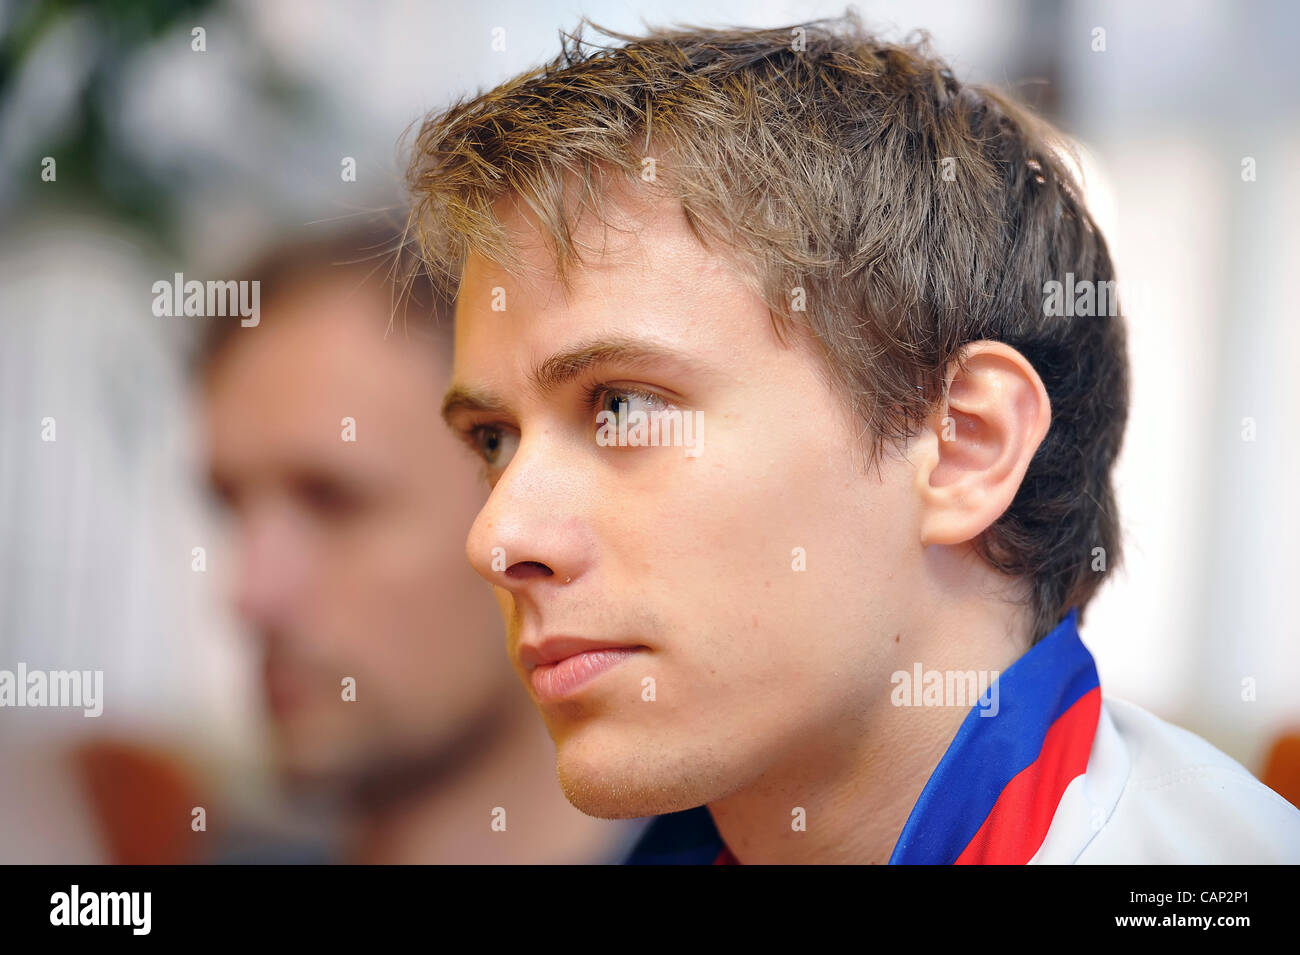 Czech figure skater Michal Brezina speaks during press conference in Prague, Czech Republic on April 3, 2012 after his arrival from the Ice skating World Cup. (CTK Photo/Igor Sefr) Stock Photo